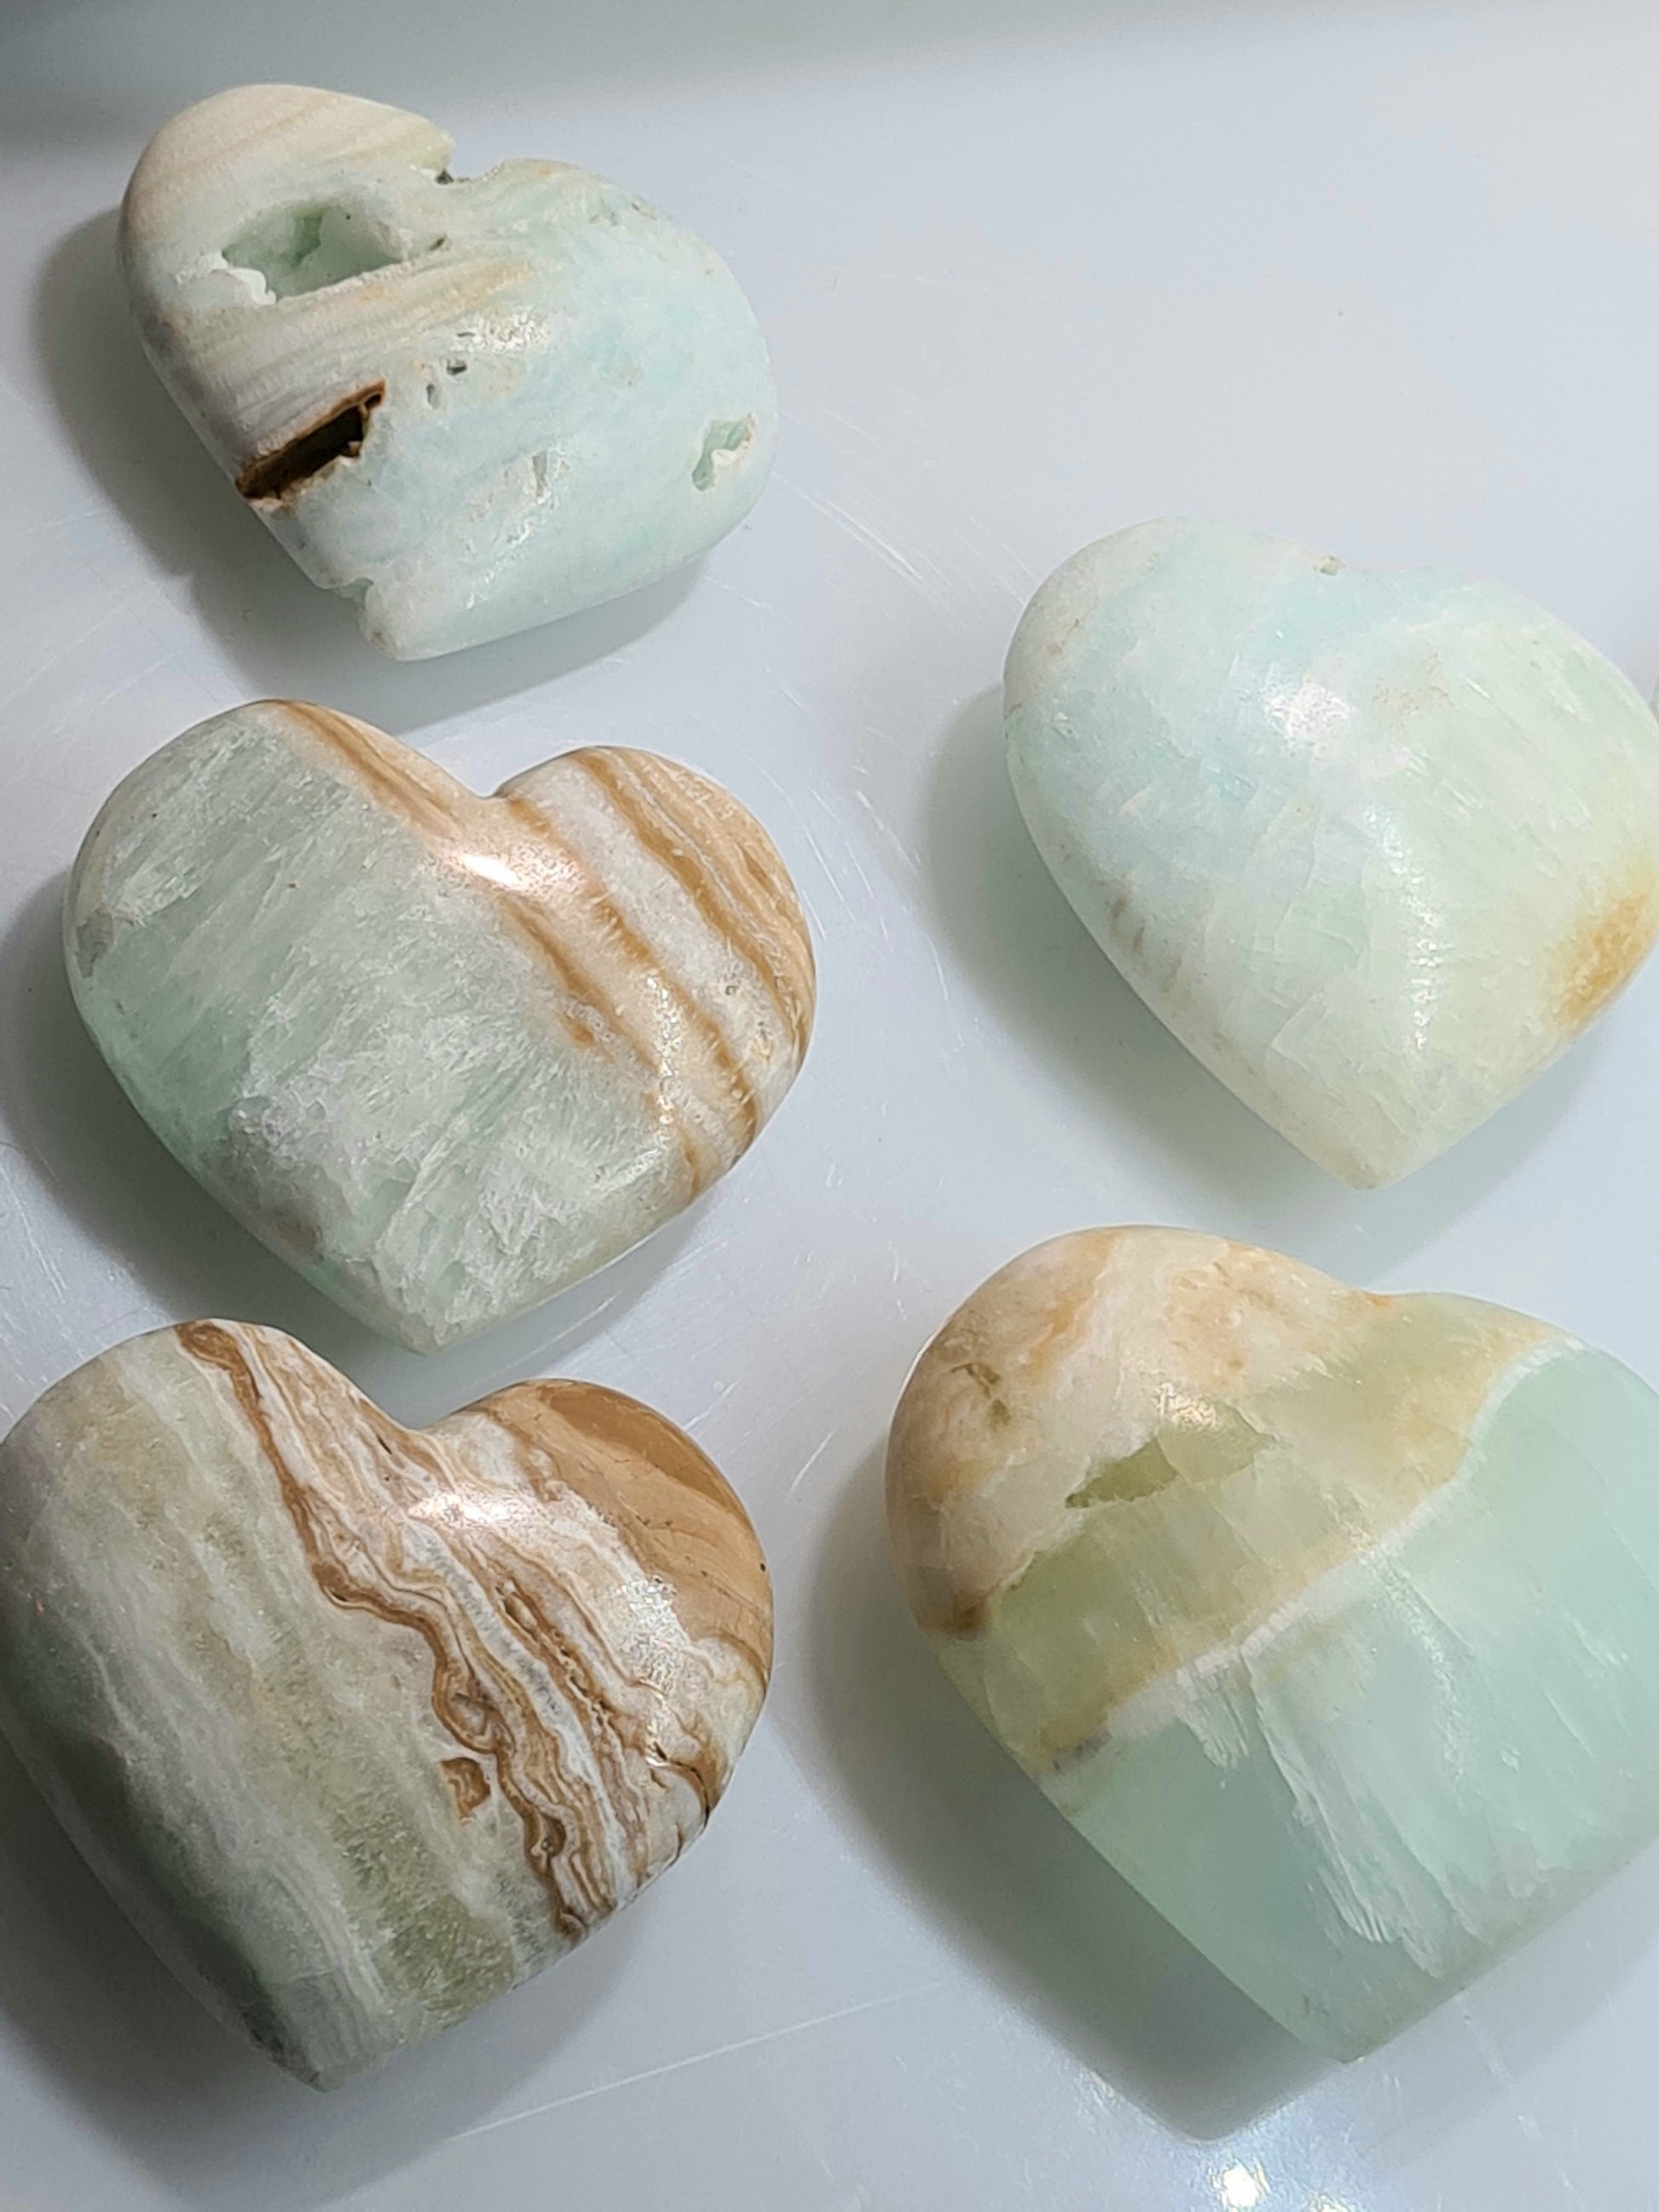 A collection of Caribbean Calcite Heart shaped crystals with blue calcite and brown and white aragonite